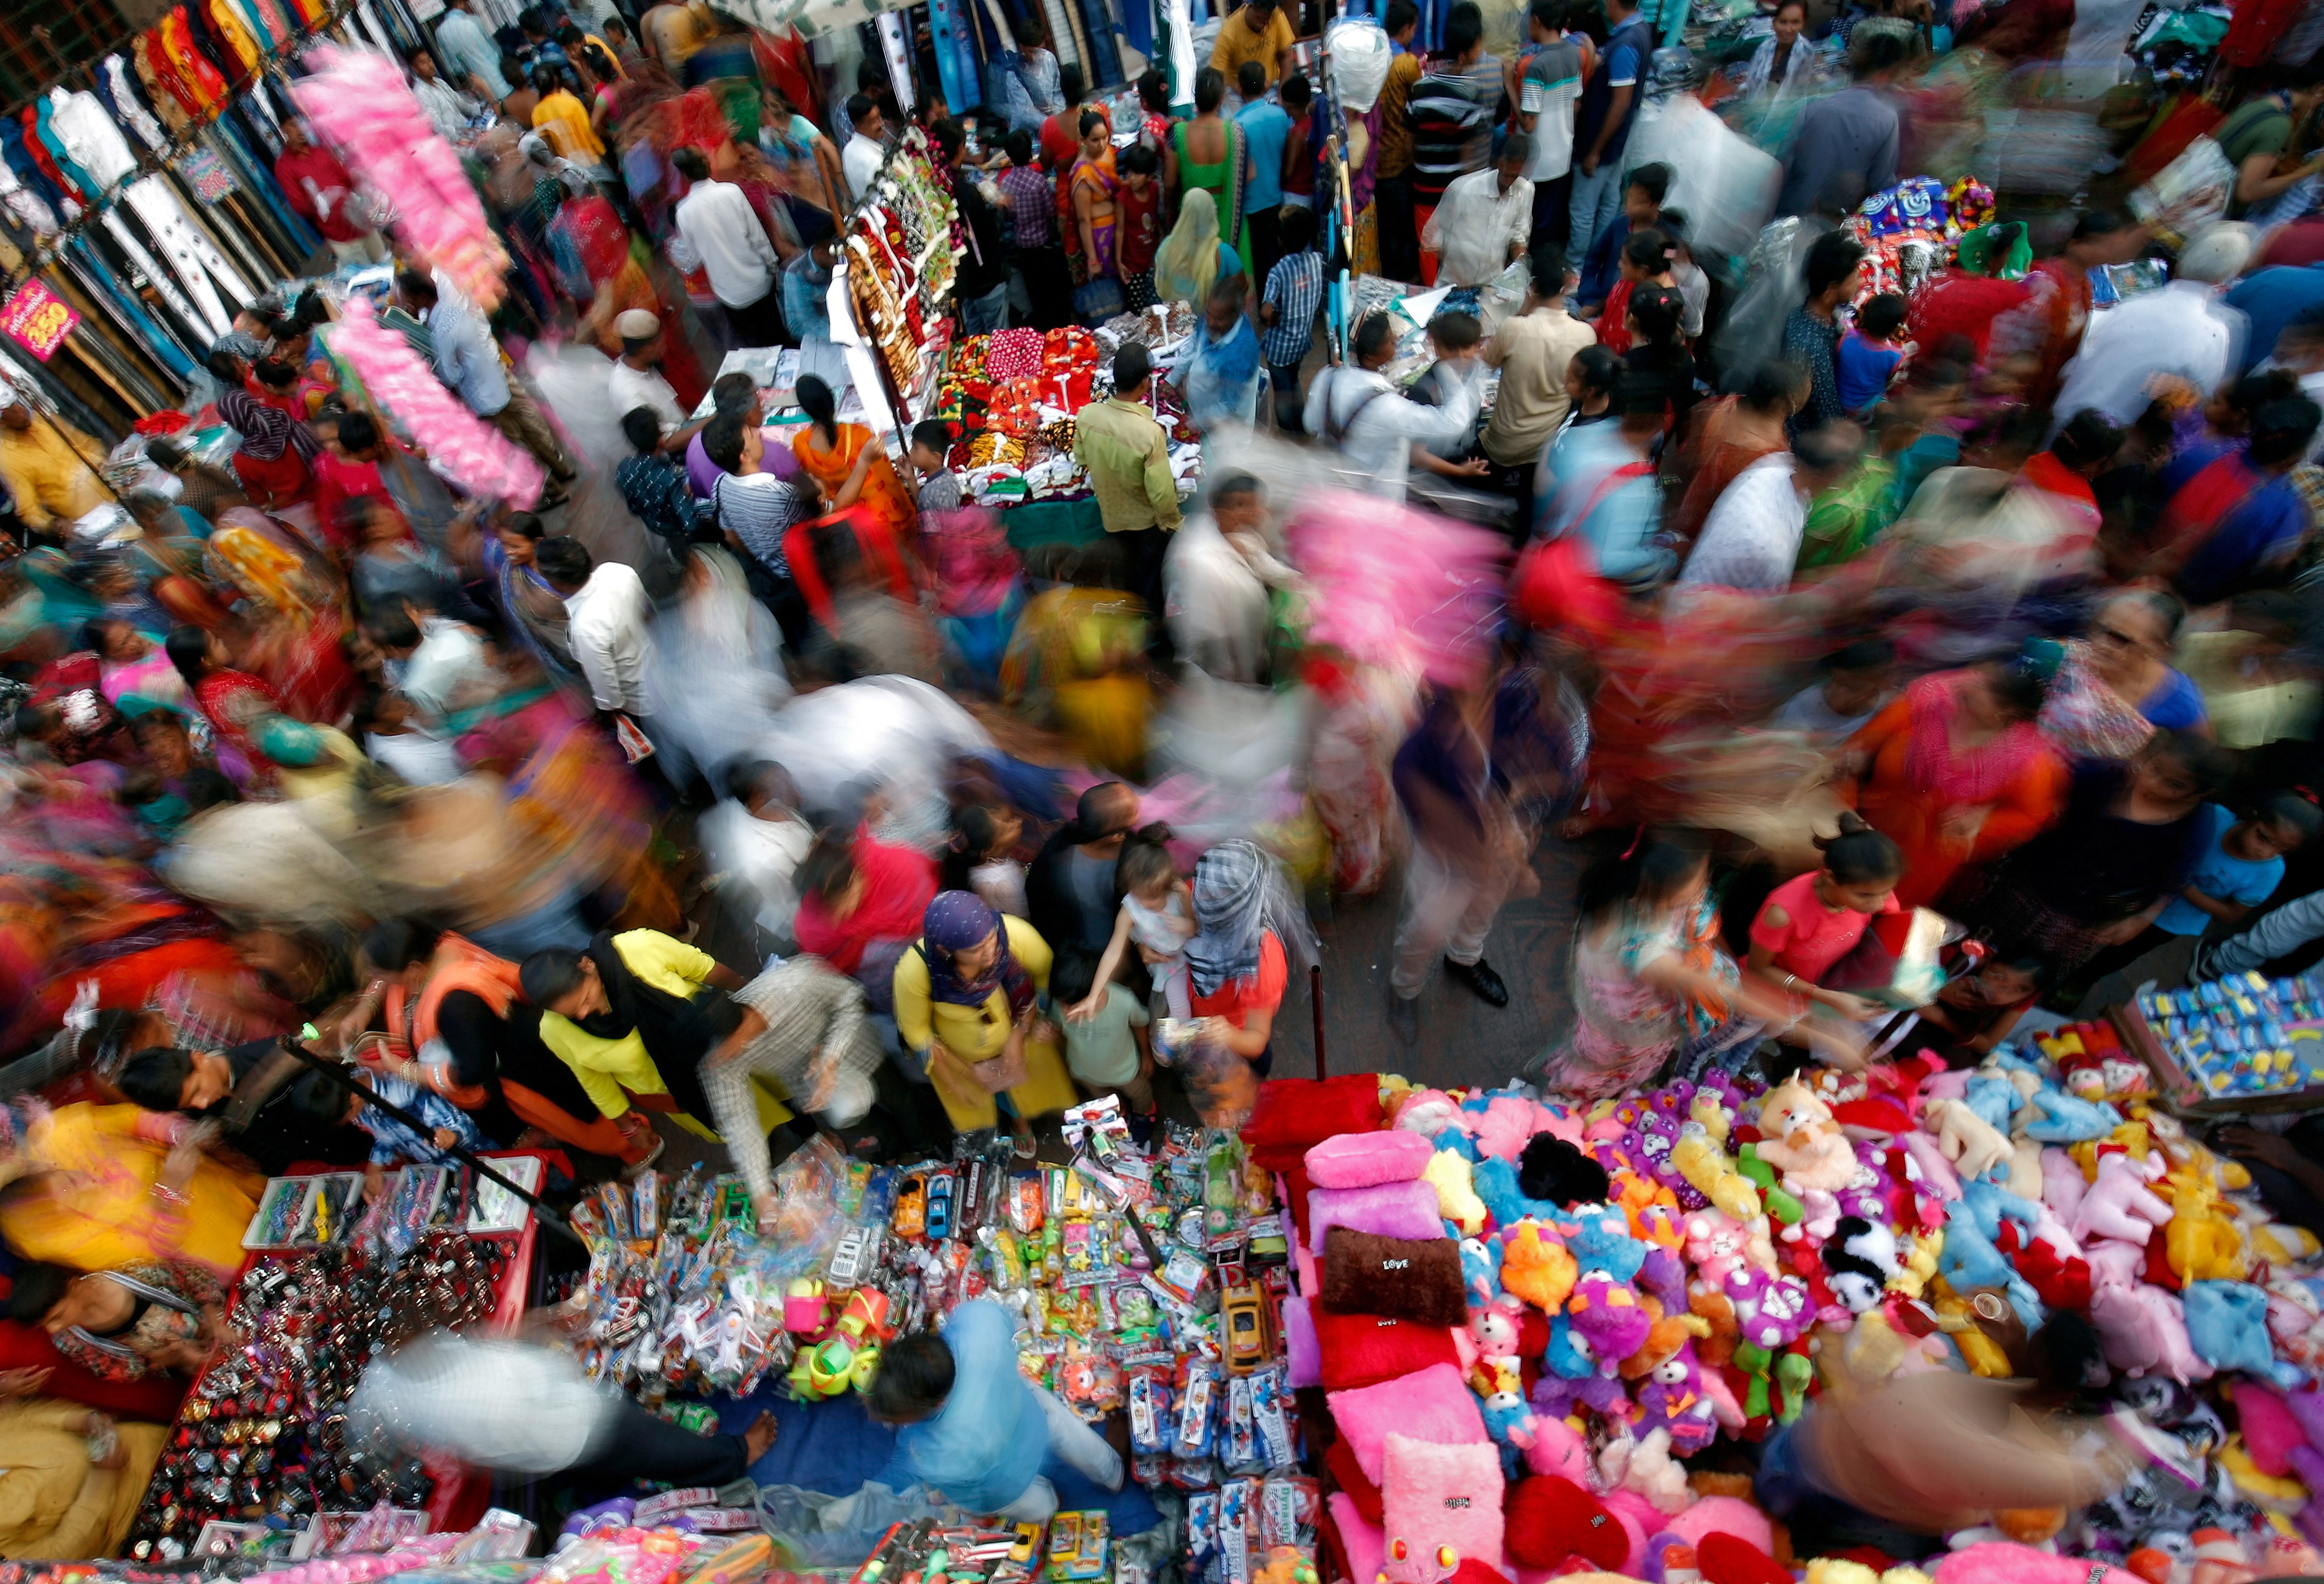 Shoppers crowd at a market place ahead of Diwali in Ahmedabad